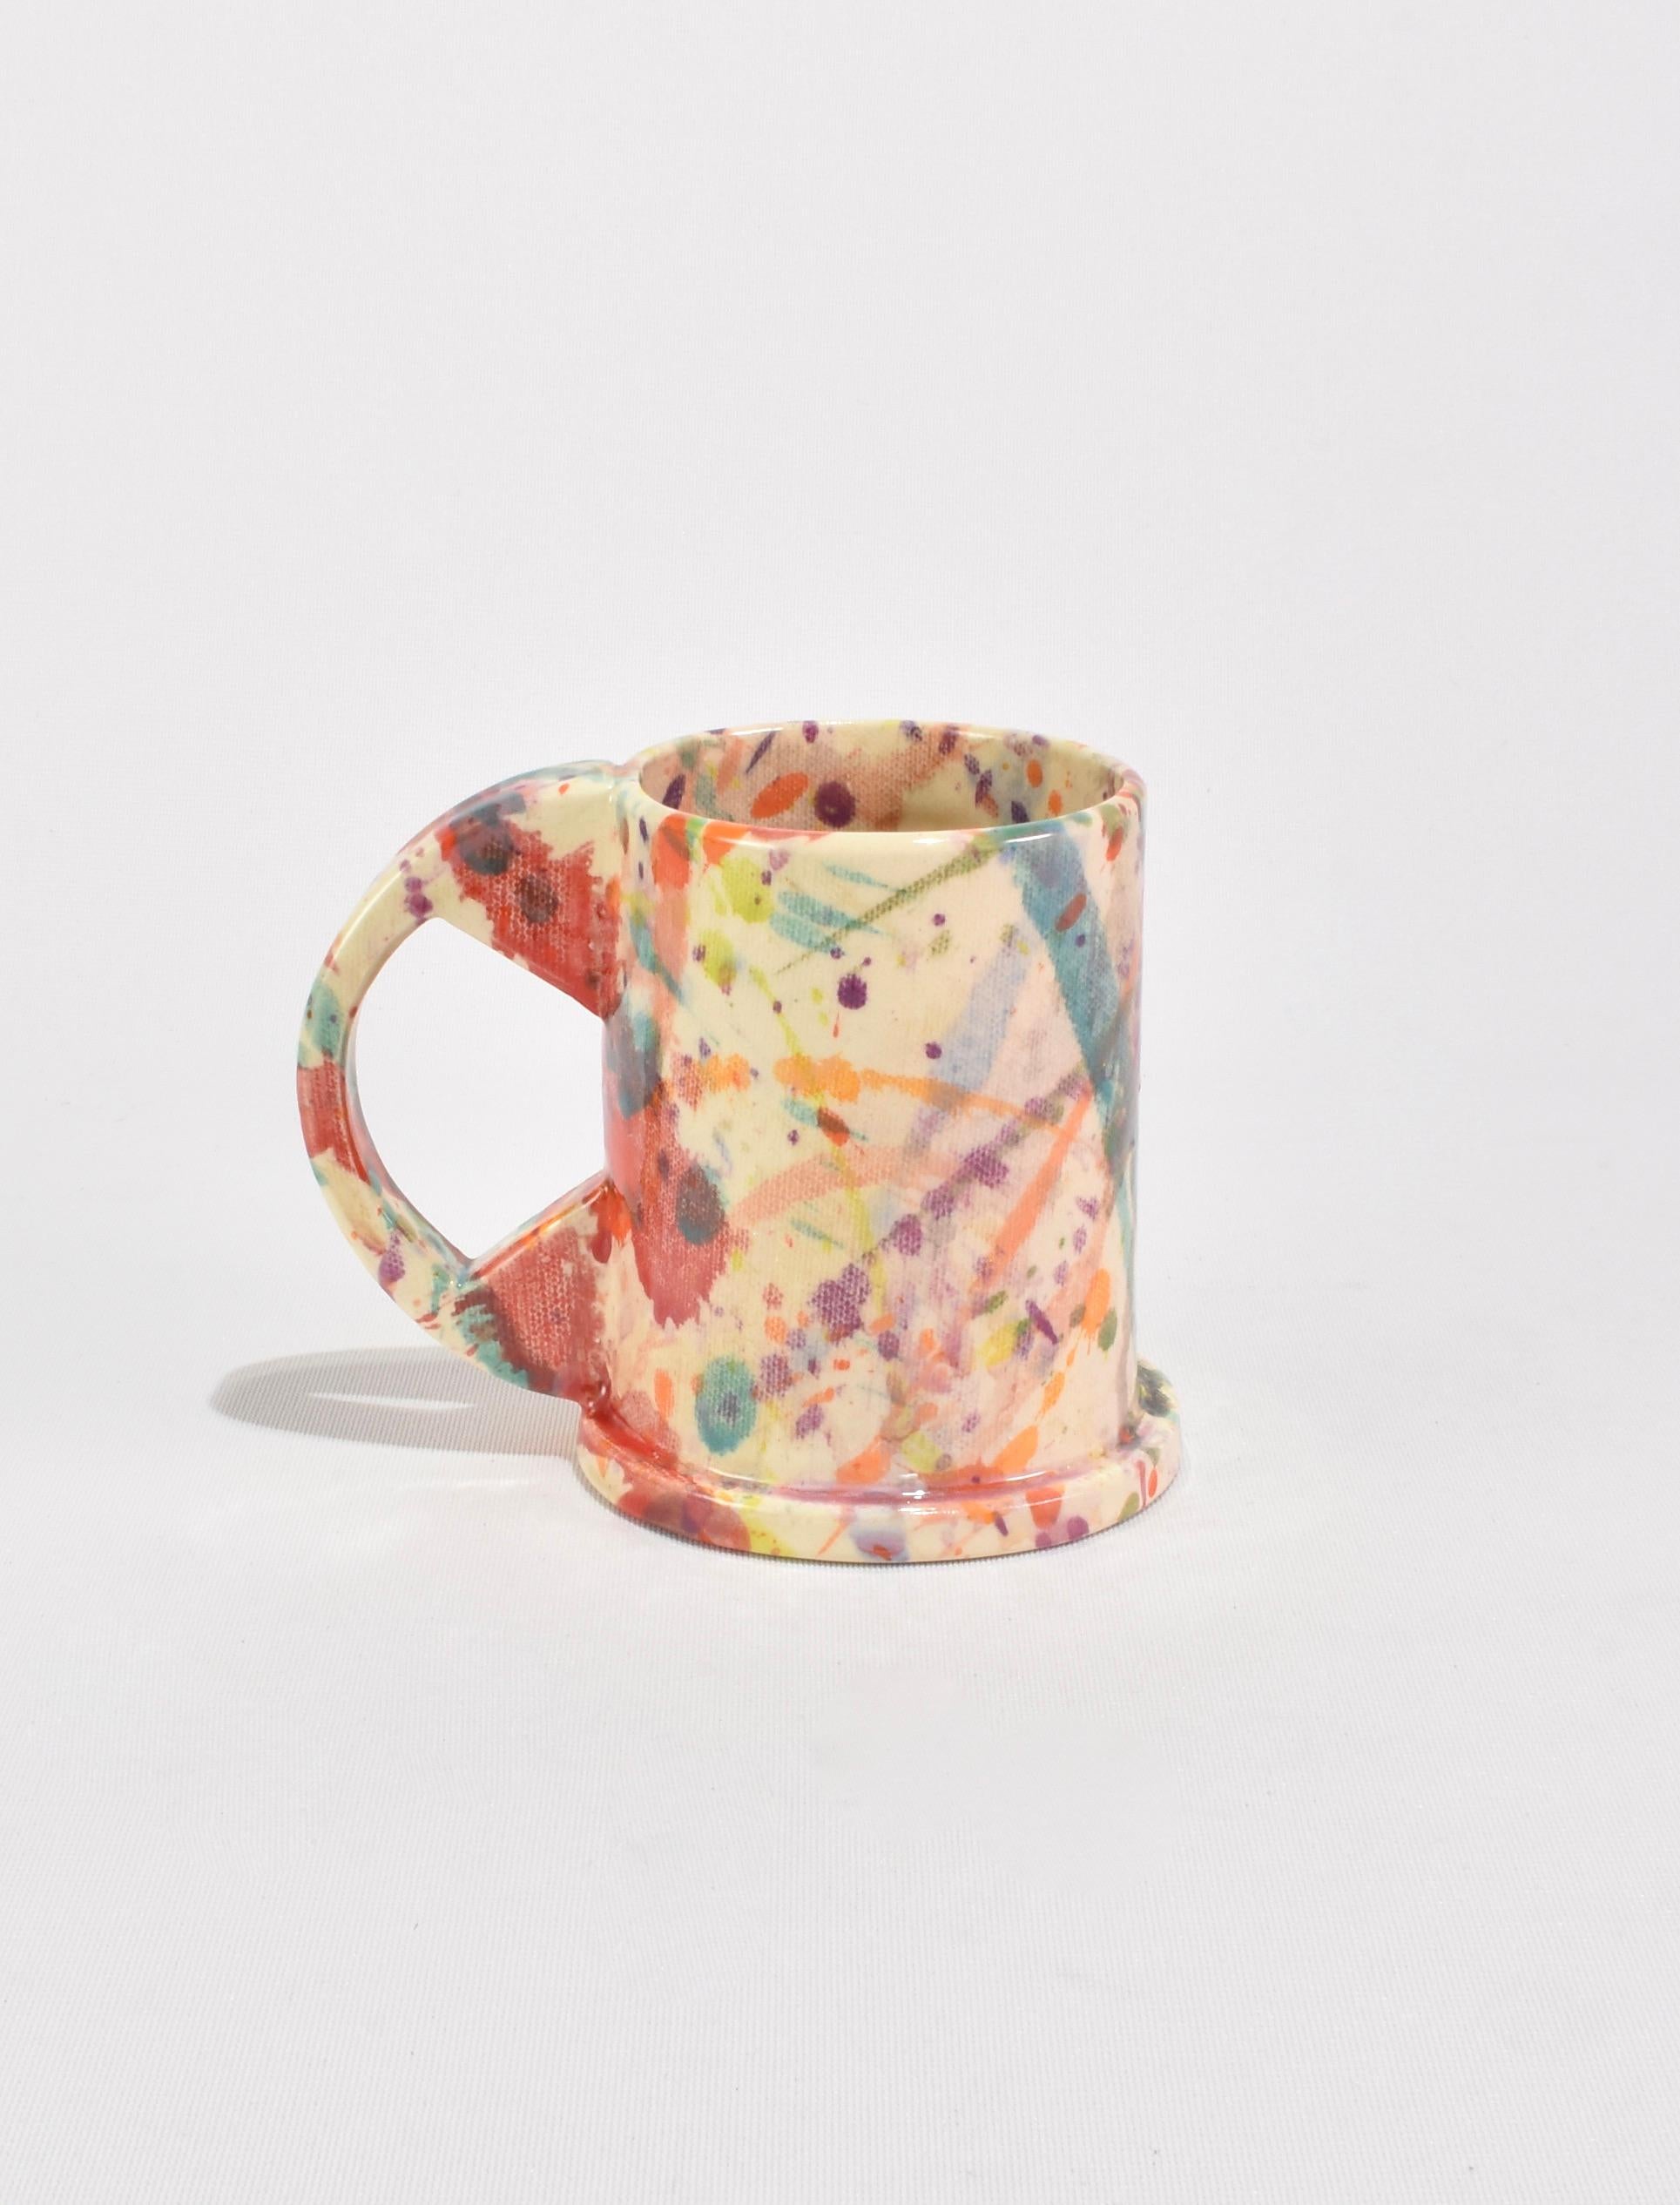 One-of-a-kind Tall Splatter Mugs designed by Peter Shire. These functional and sculptural mugs are crafted by Echo Park Pottery in Los Angeles using slab construction and individually hand-painted. Stamped on base: EXP 2023. Sold